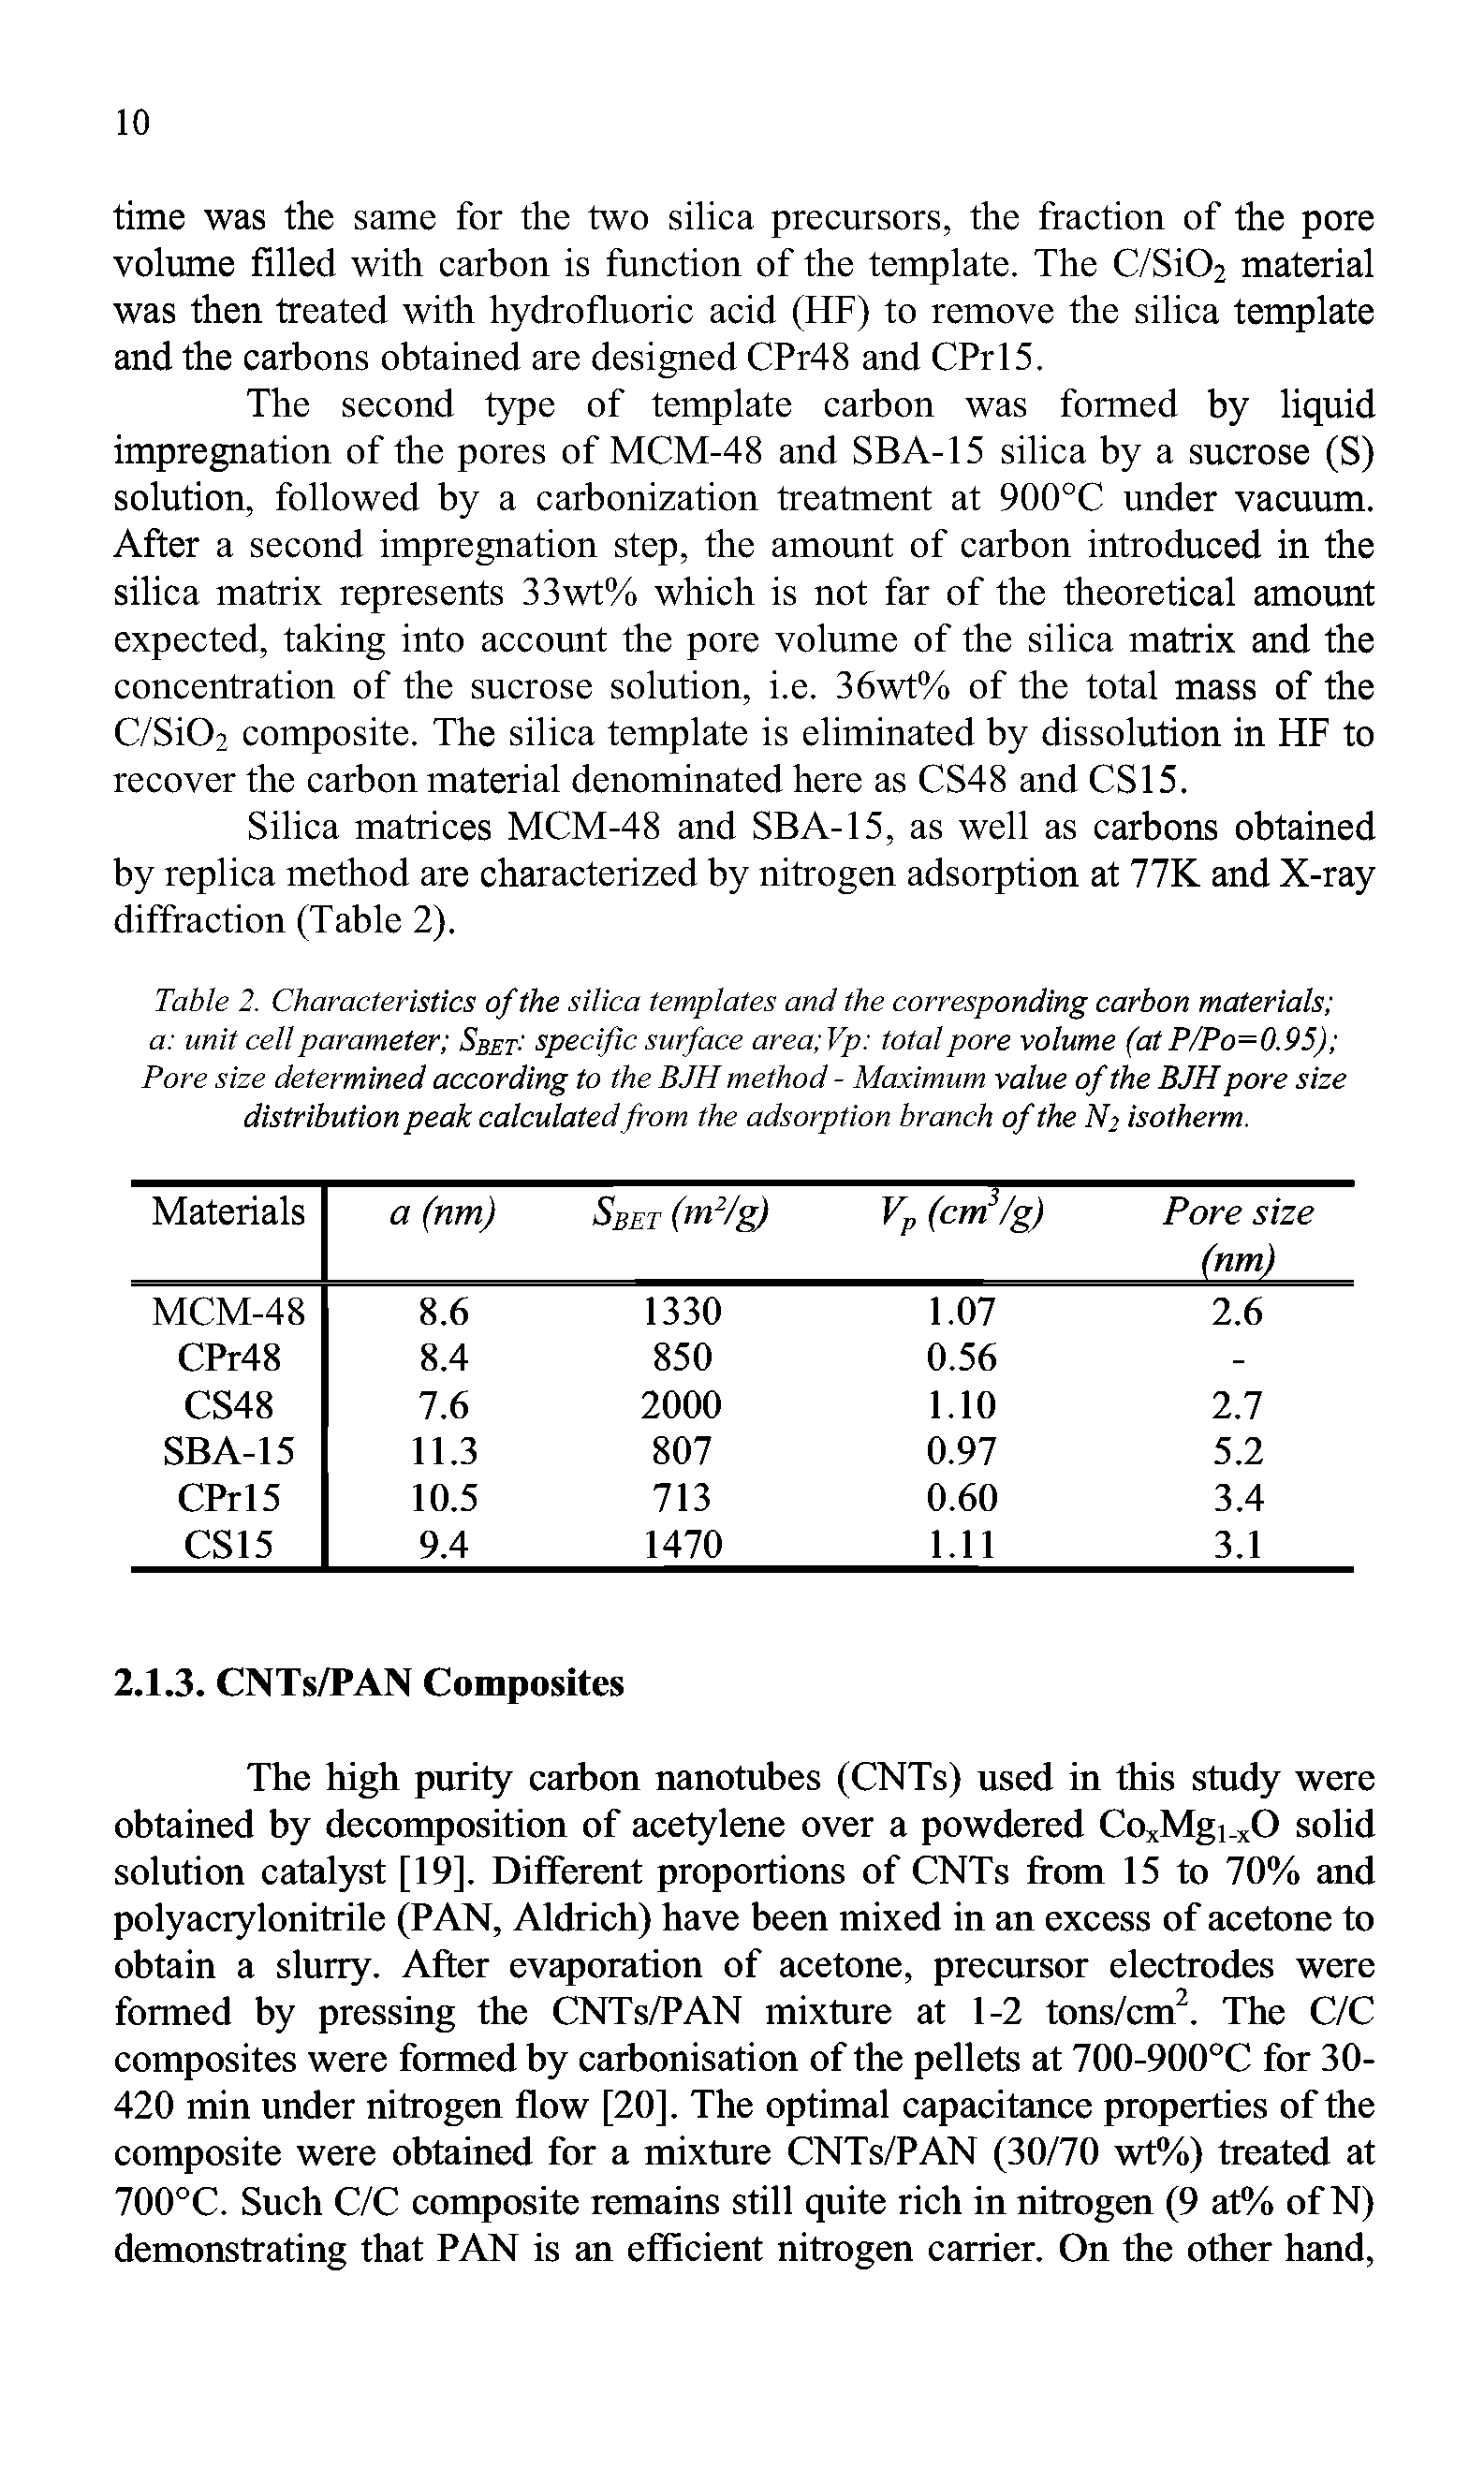 Table 2. Characteristics of the silica templates and the corresponding carbon materials a unit cell parameter Sbet- specific surface area Vp total pore volume (at P/Po=0.95) Pore size determined according to the BJH method - Maximum value of the BJH pore size distribution peak calculated from the adsorption branch of the N2 isotherm.